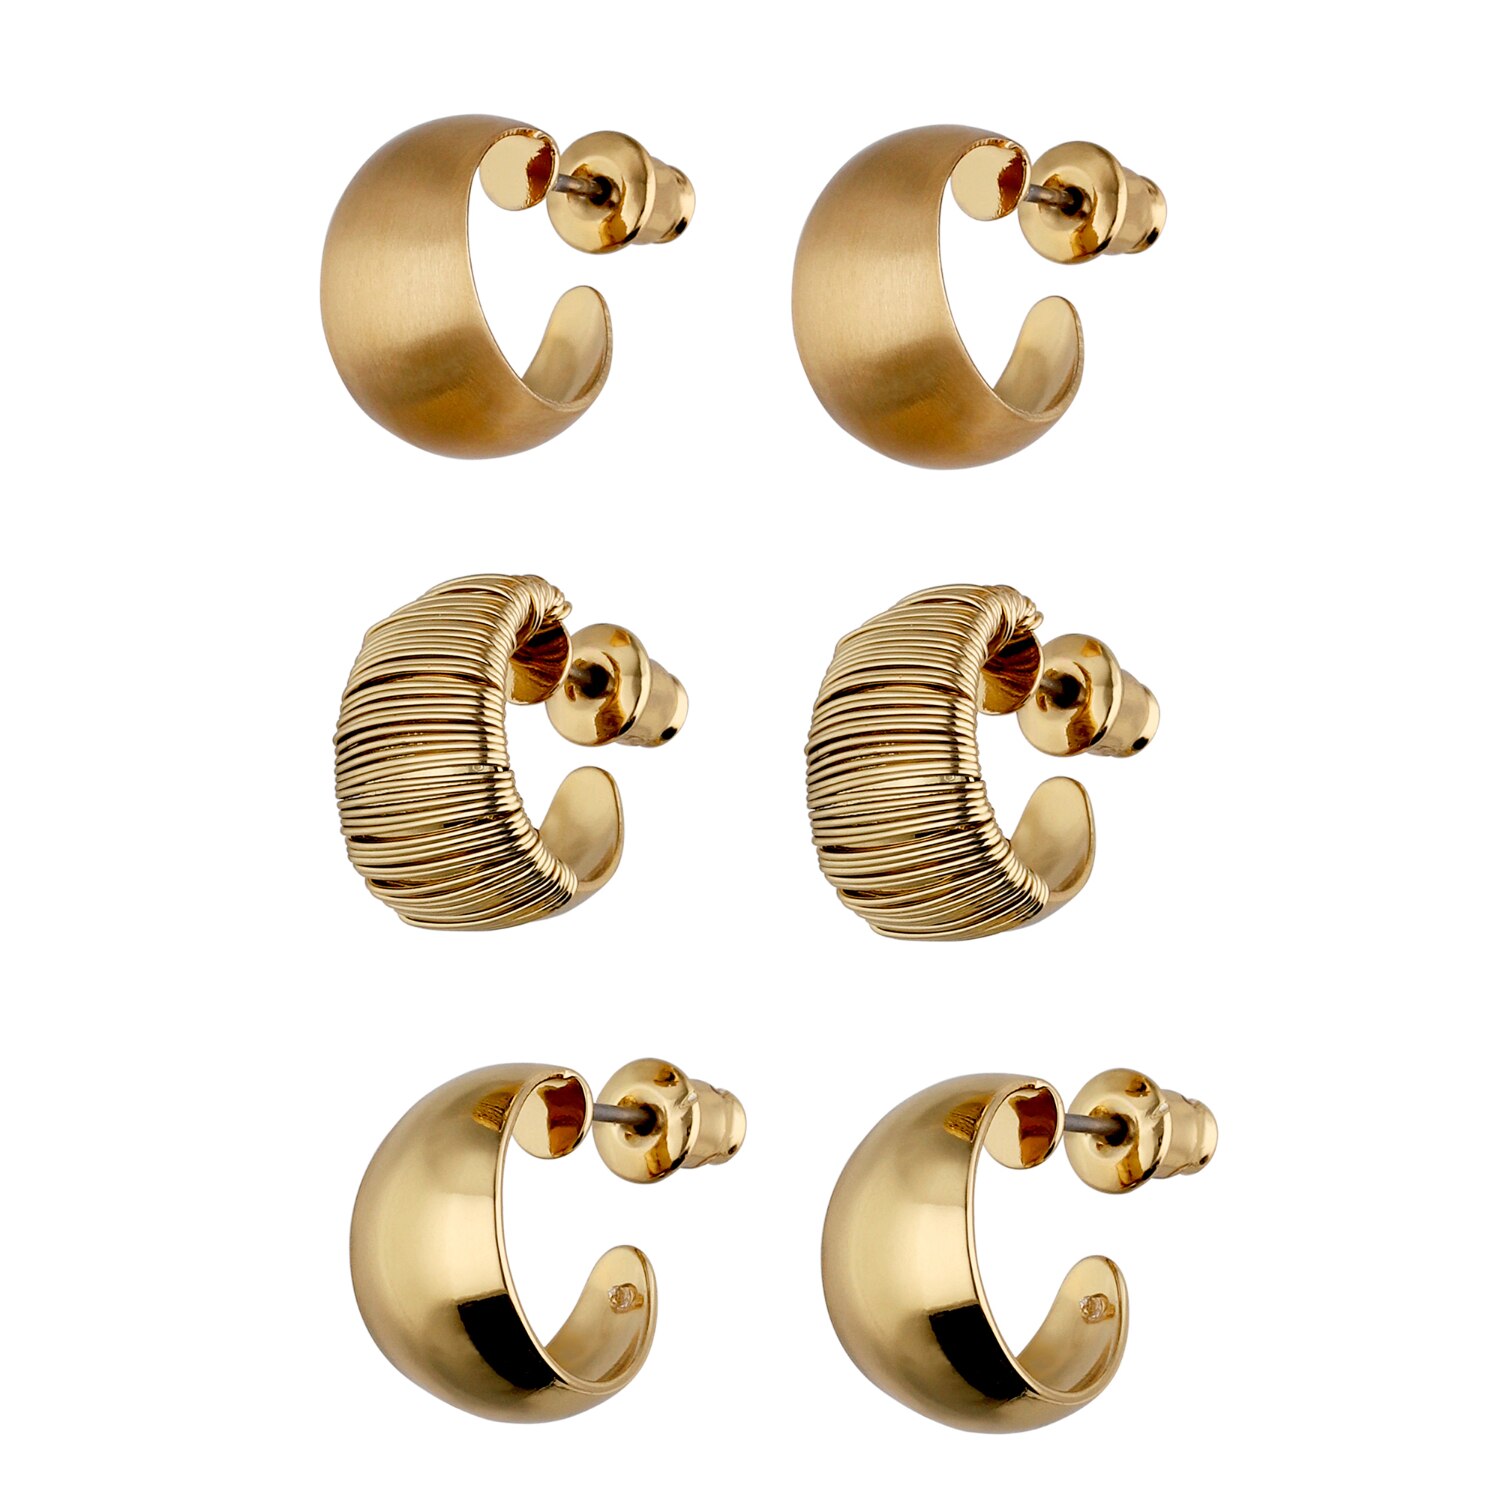 I AM Jewelry Casual-Simple Creole Earring Set, Gold, 6CT